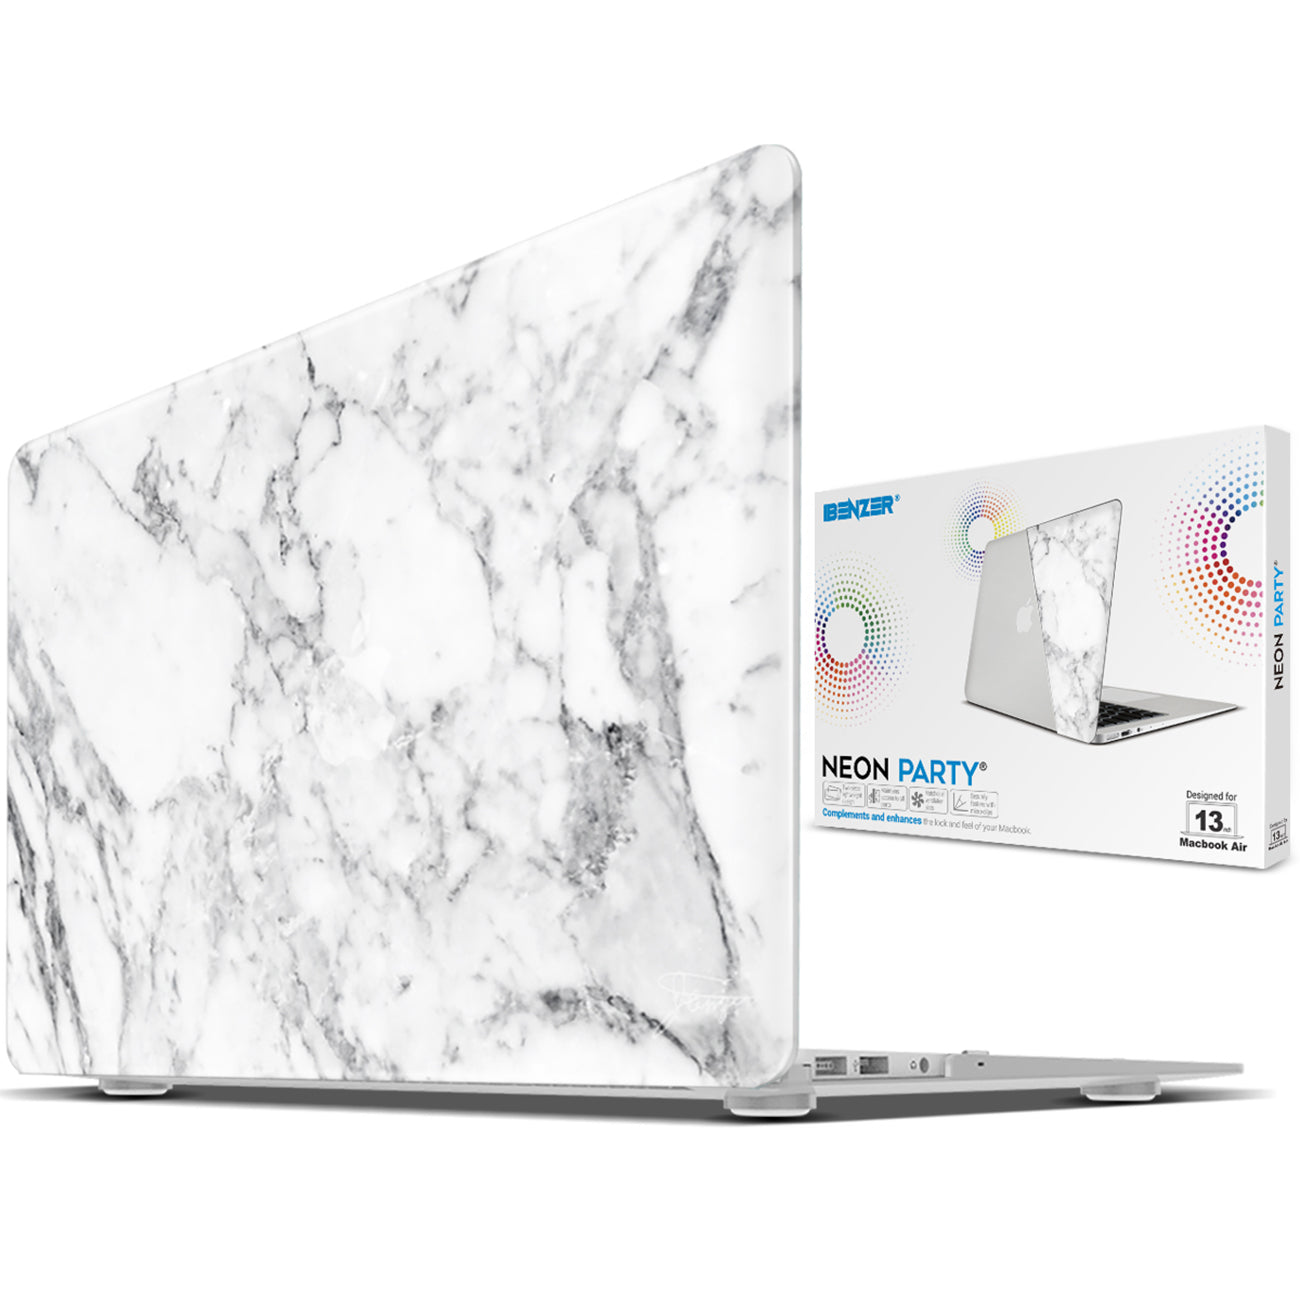 Superior iBenzer Neon Party Macbook Air 13“ White Marble case For old Air 13, not 2018 Air